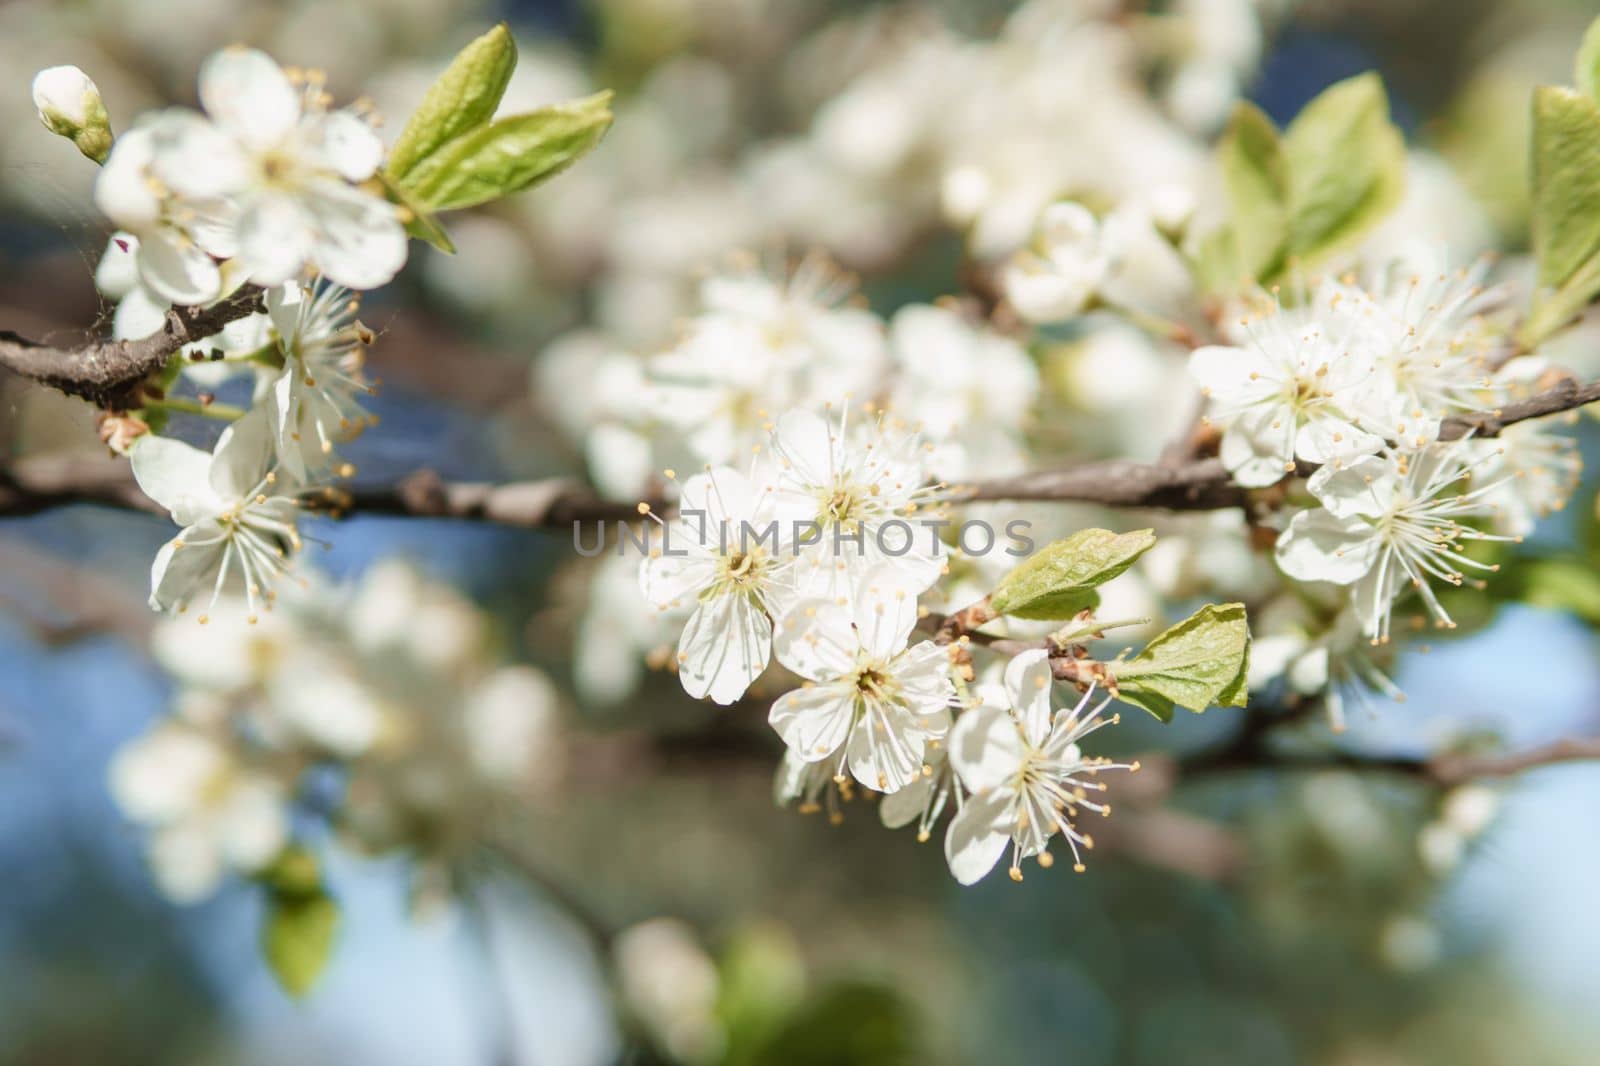 Blooming cherry branches with white flowers close-up, background of spring nature. Macro image of vegetation, close-up with depth of field